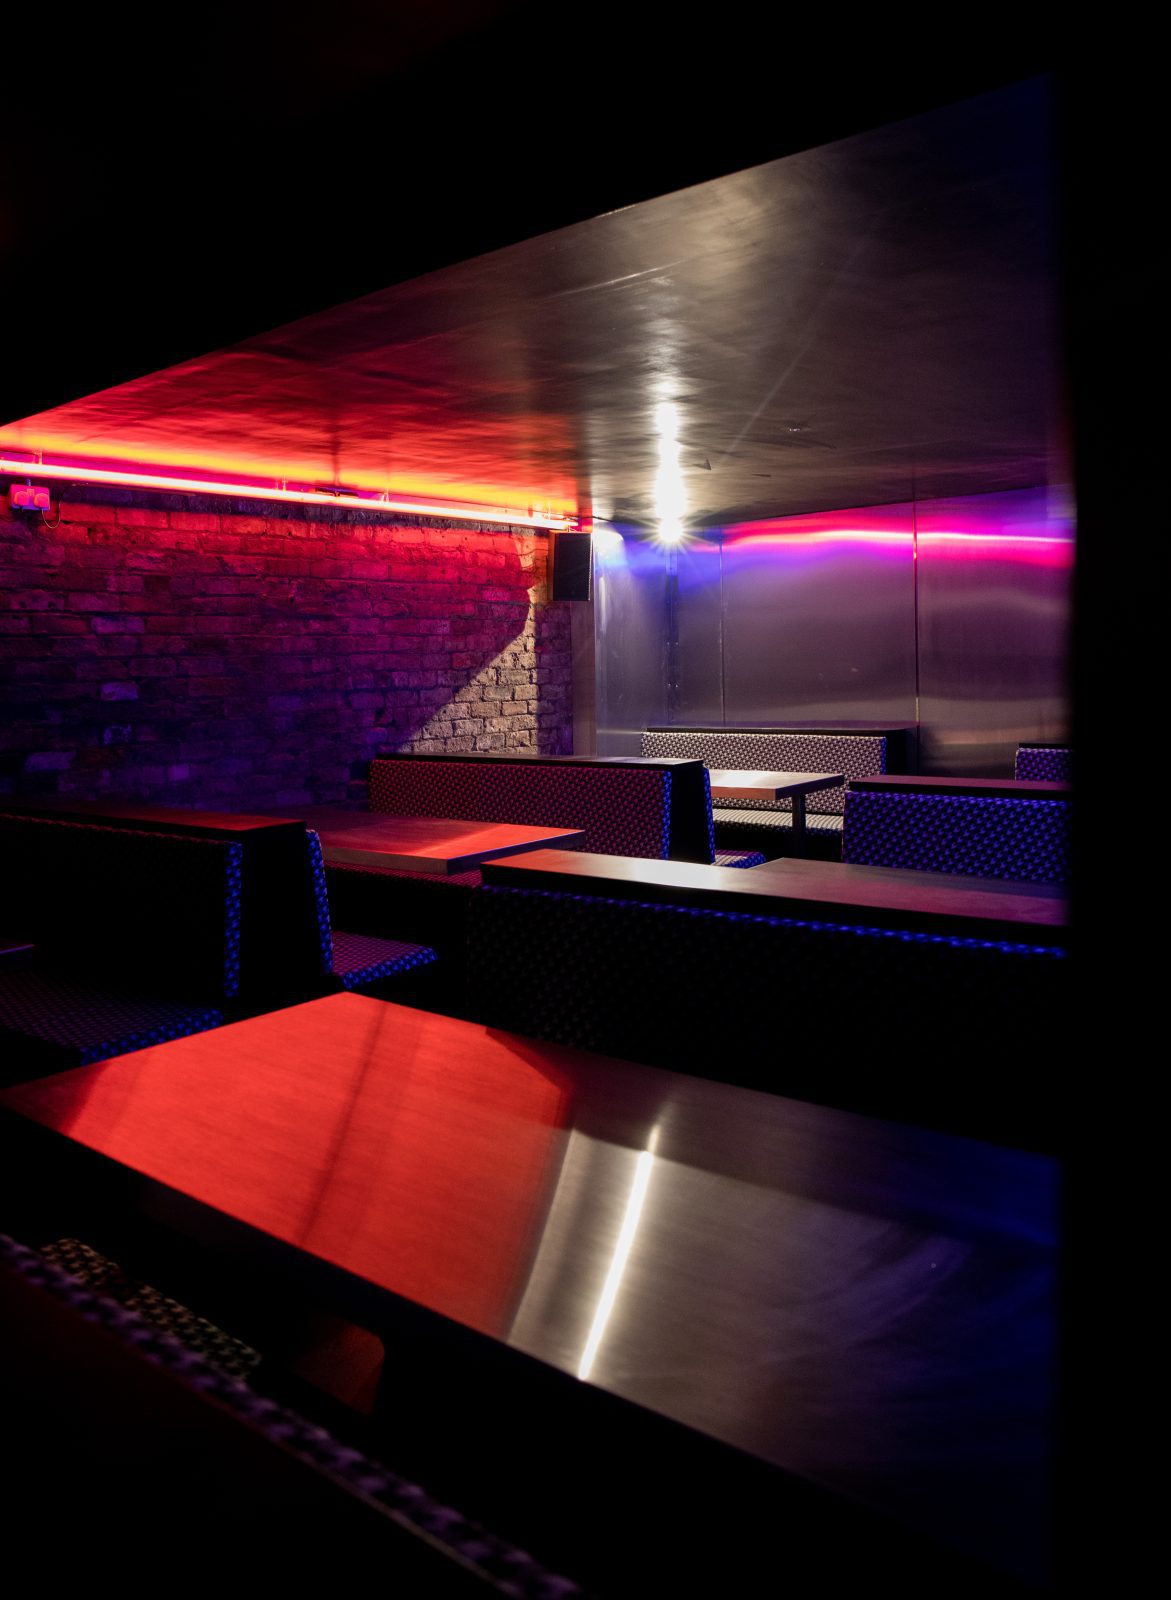 A futuristic new Blade Runner-style bar has opened beneath NQ restaurant District, The Manc